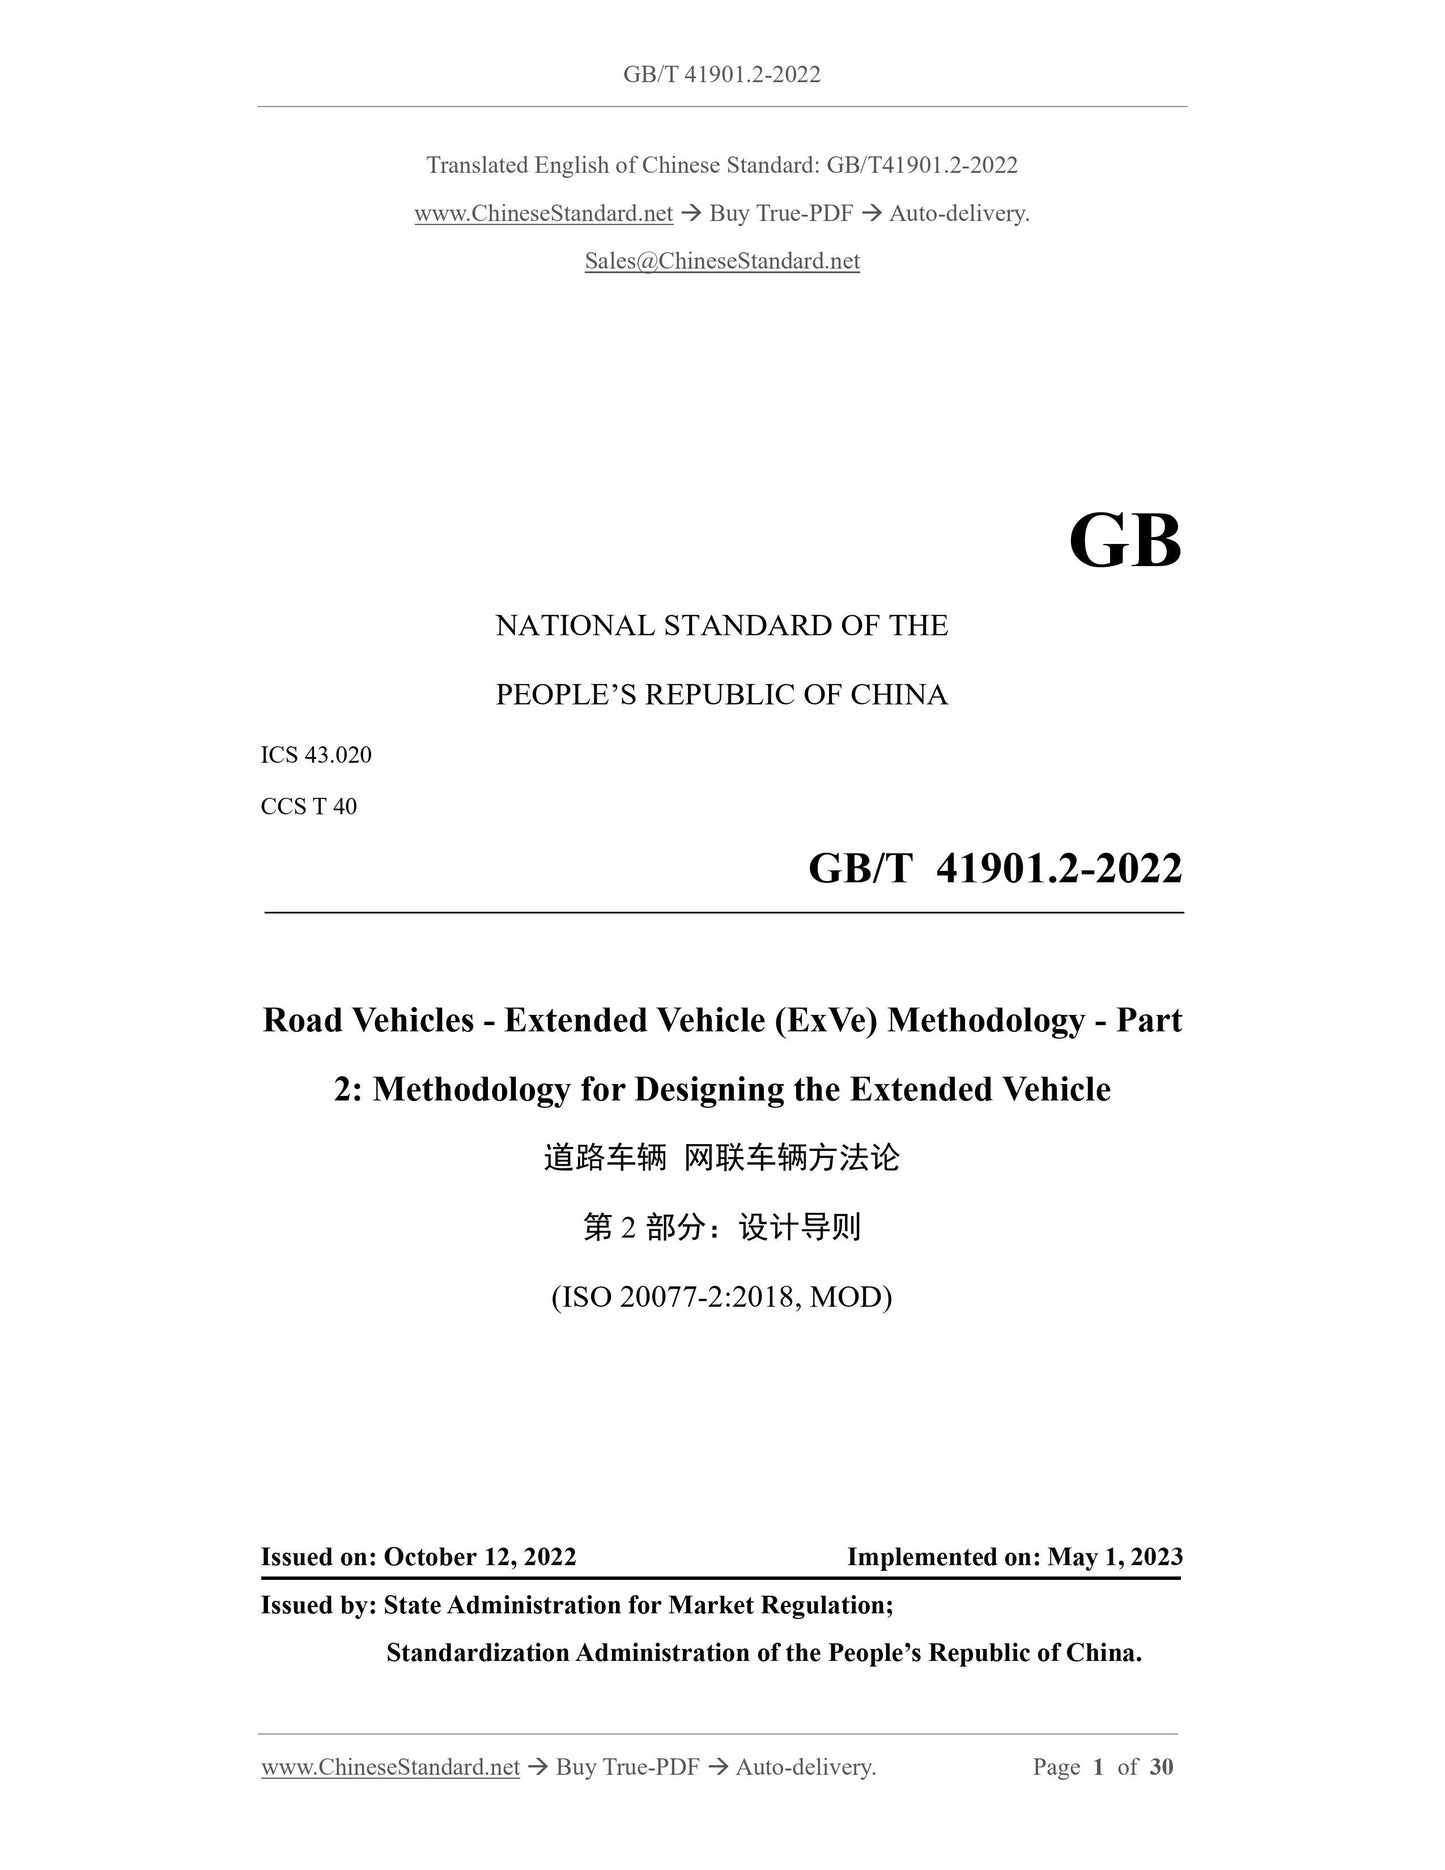 GB/T 41901.2-2022 Page 1